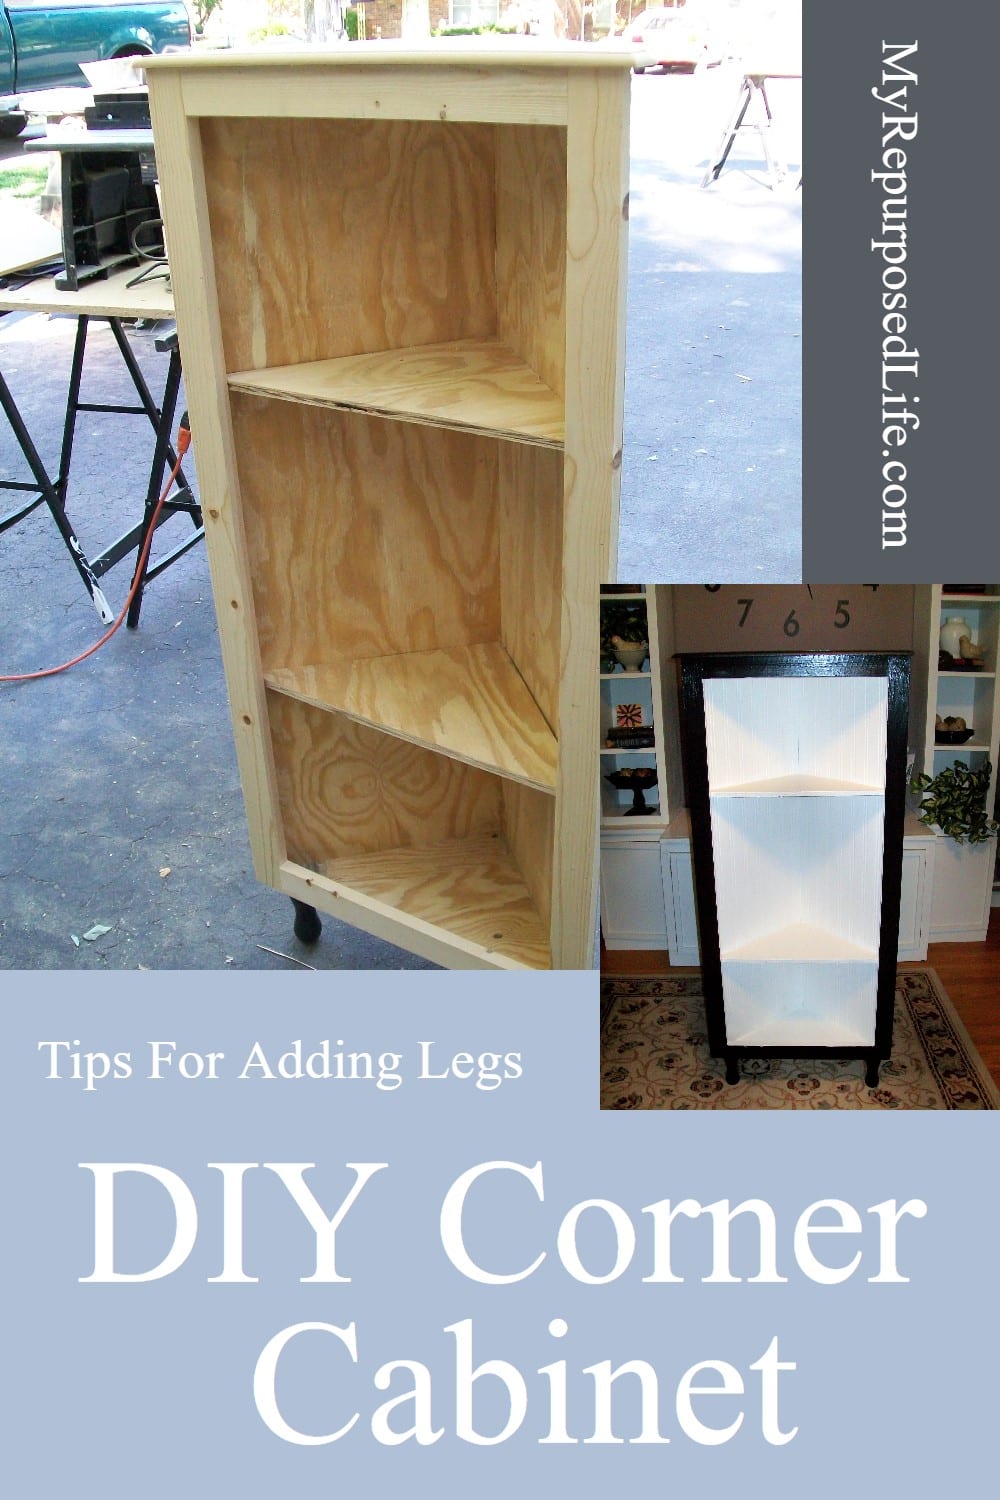 How to make a DIY corner cabinet using cull bin plywood spindle legs and bead board wallpaper. Step by step directions take you through the process. via @repurposedlife